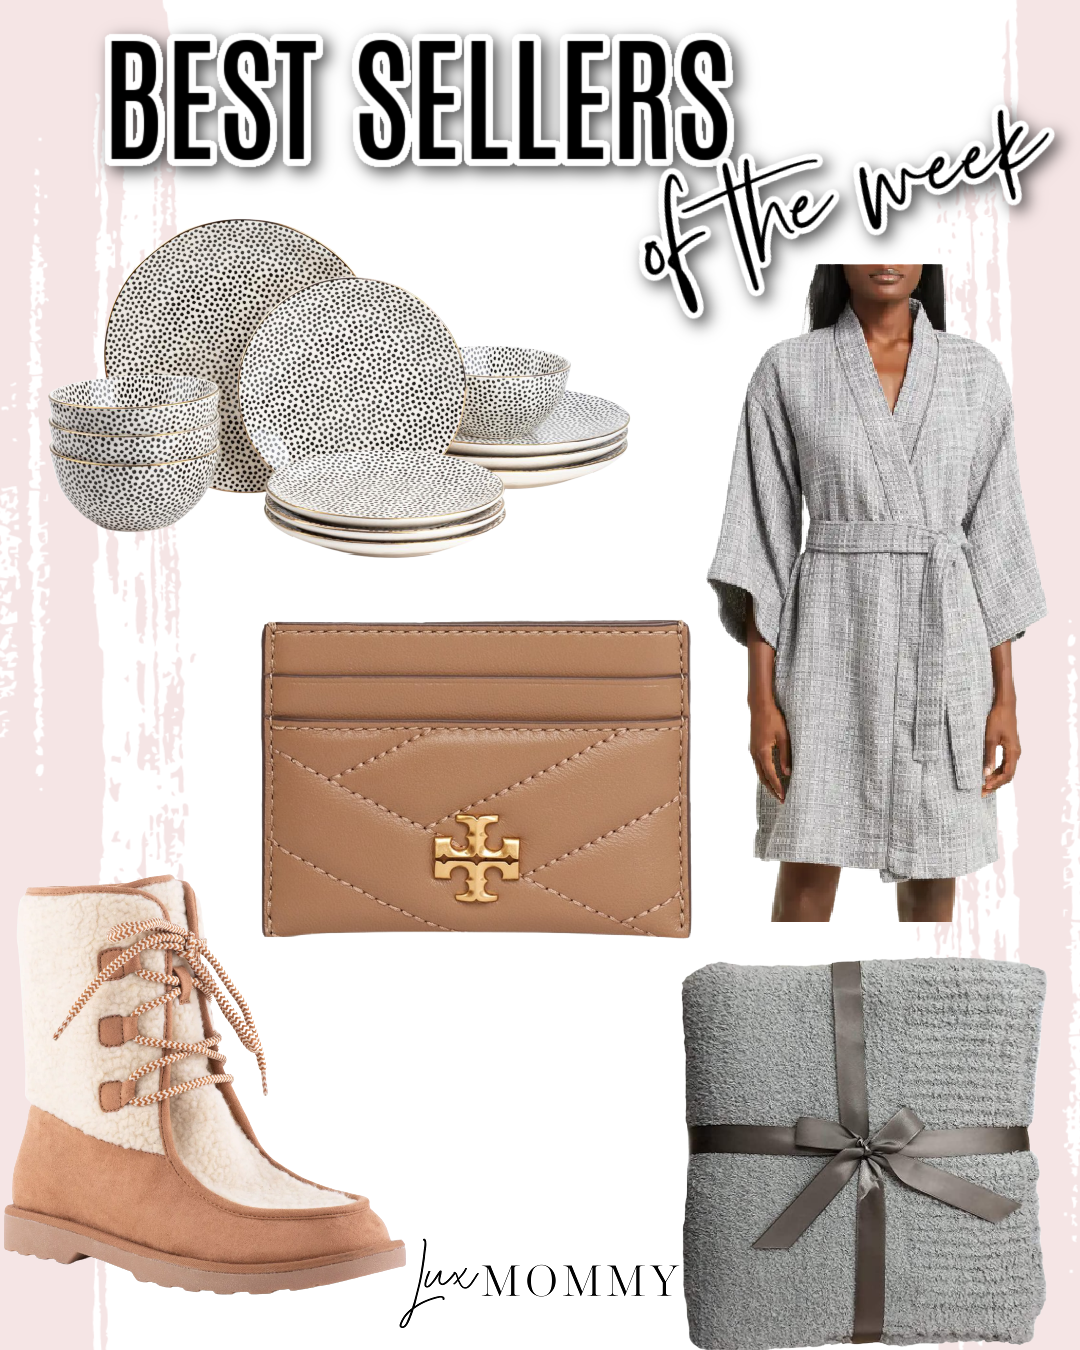 Houston fashion/lifestyle blogger LuxMommy shares best sellers of the week  including the best robe, a beautiful set of dishes, Tory Burch card holder,  shearling boots, and the perfect throw blanket